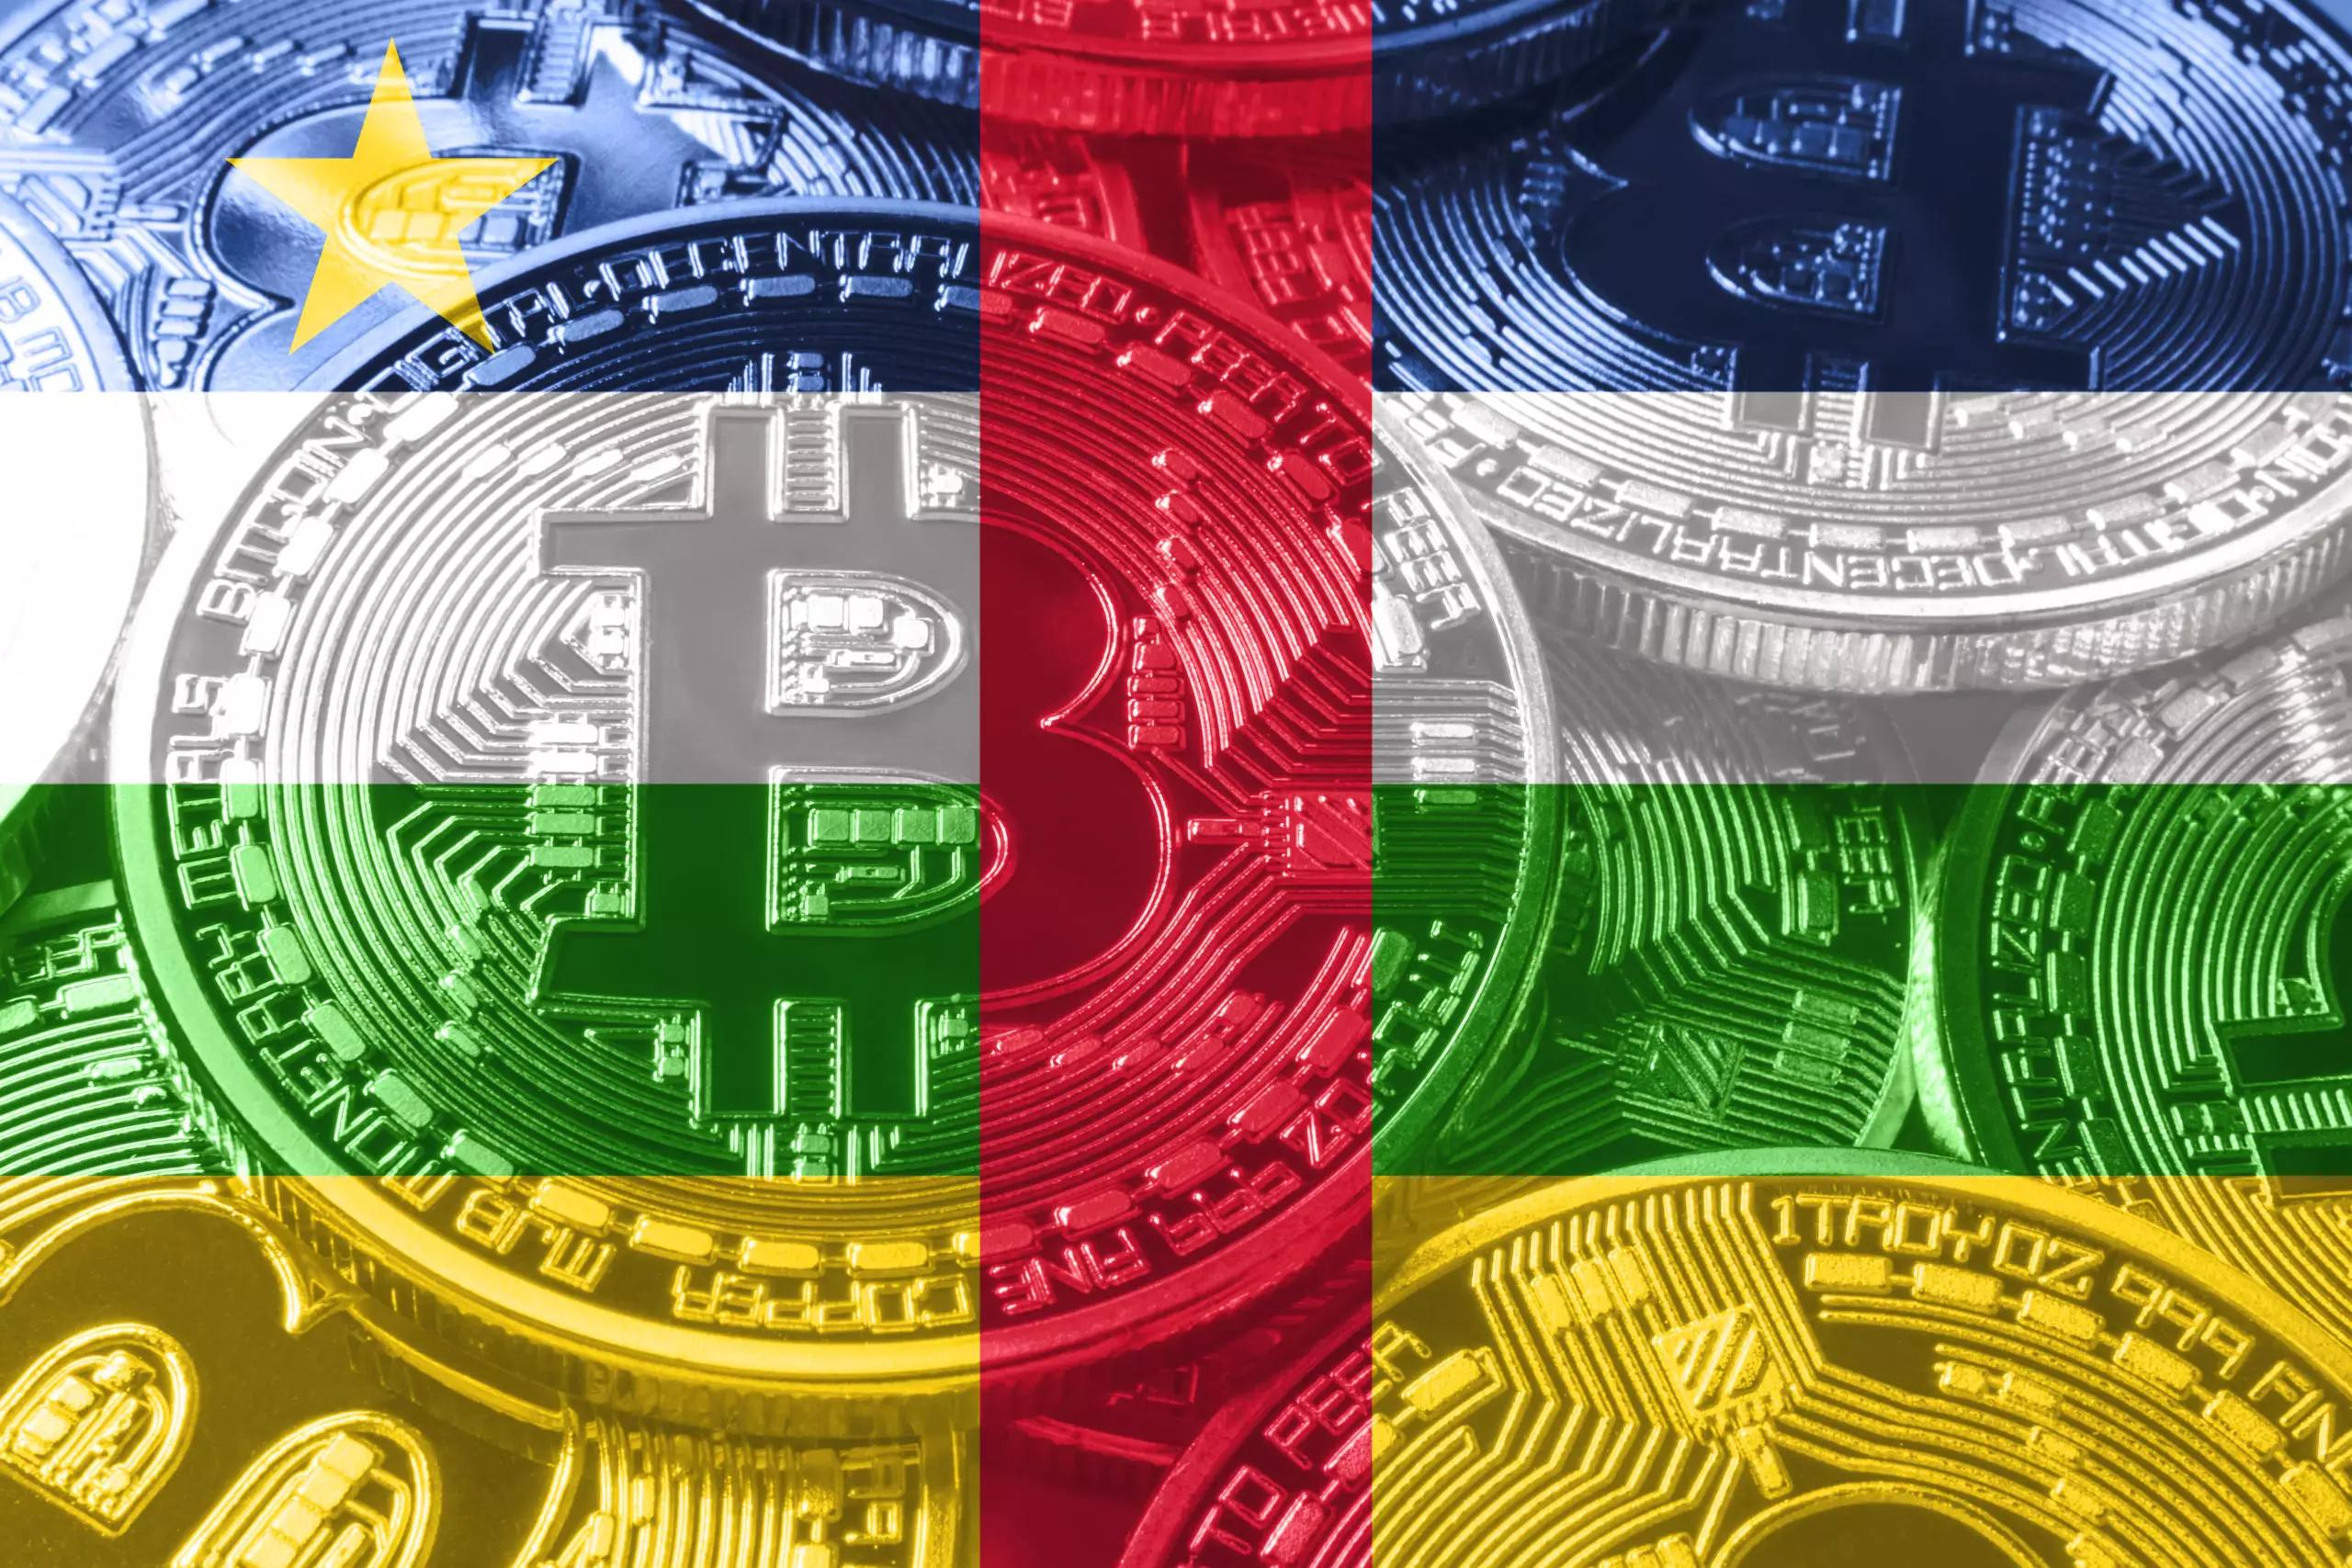 Bitcoin Is Now a Legal Tender in the Central African Republic